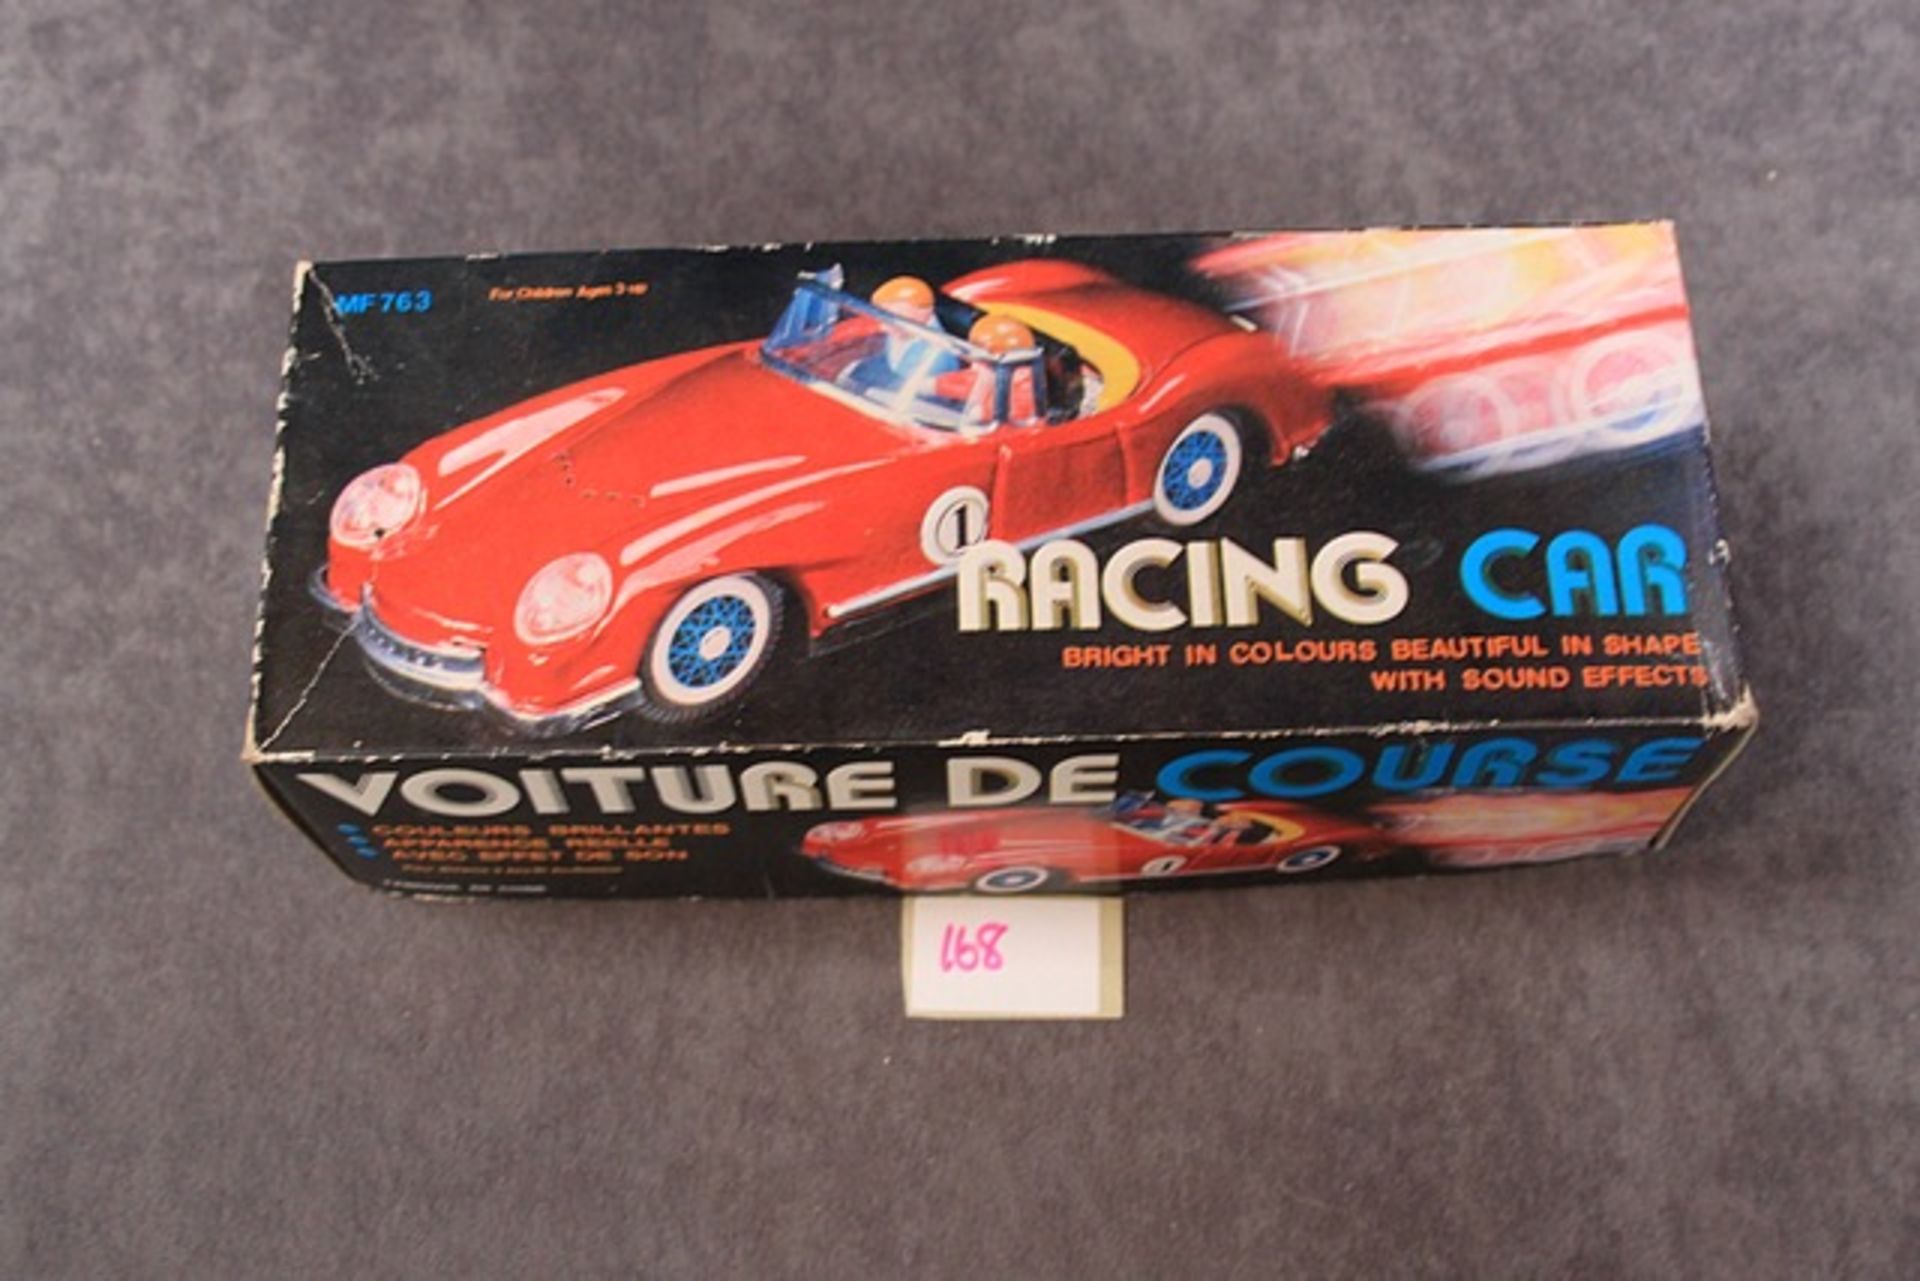 China Mf-763 Austin Woodill Race Car Tin Plated Friction Car 22cm With Sound Effects In Box - Image 3 of 3